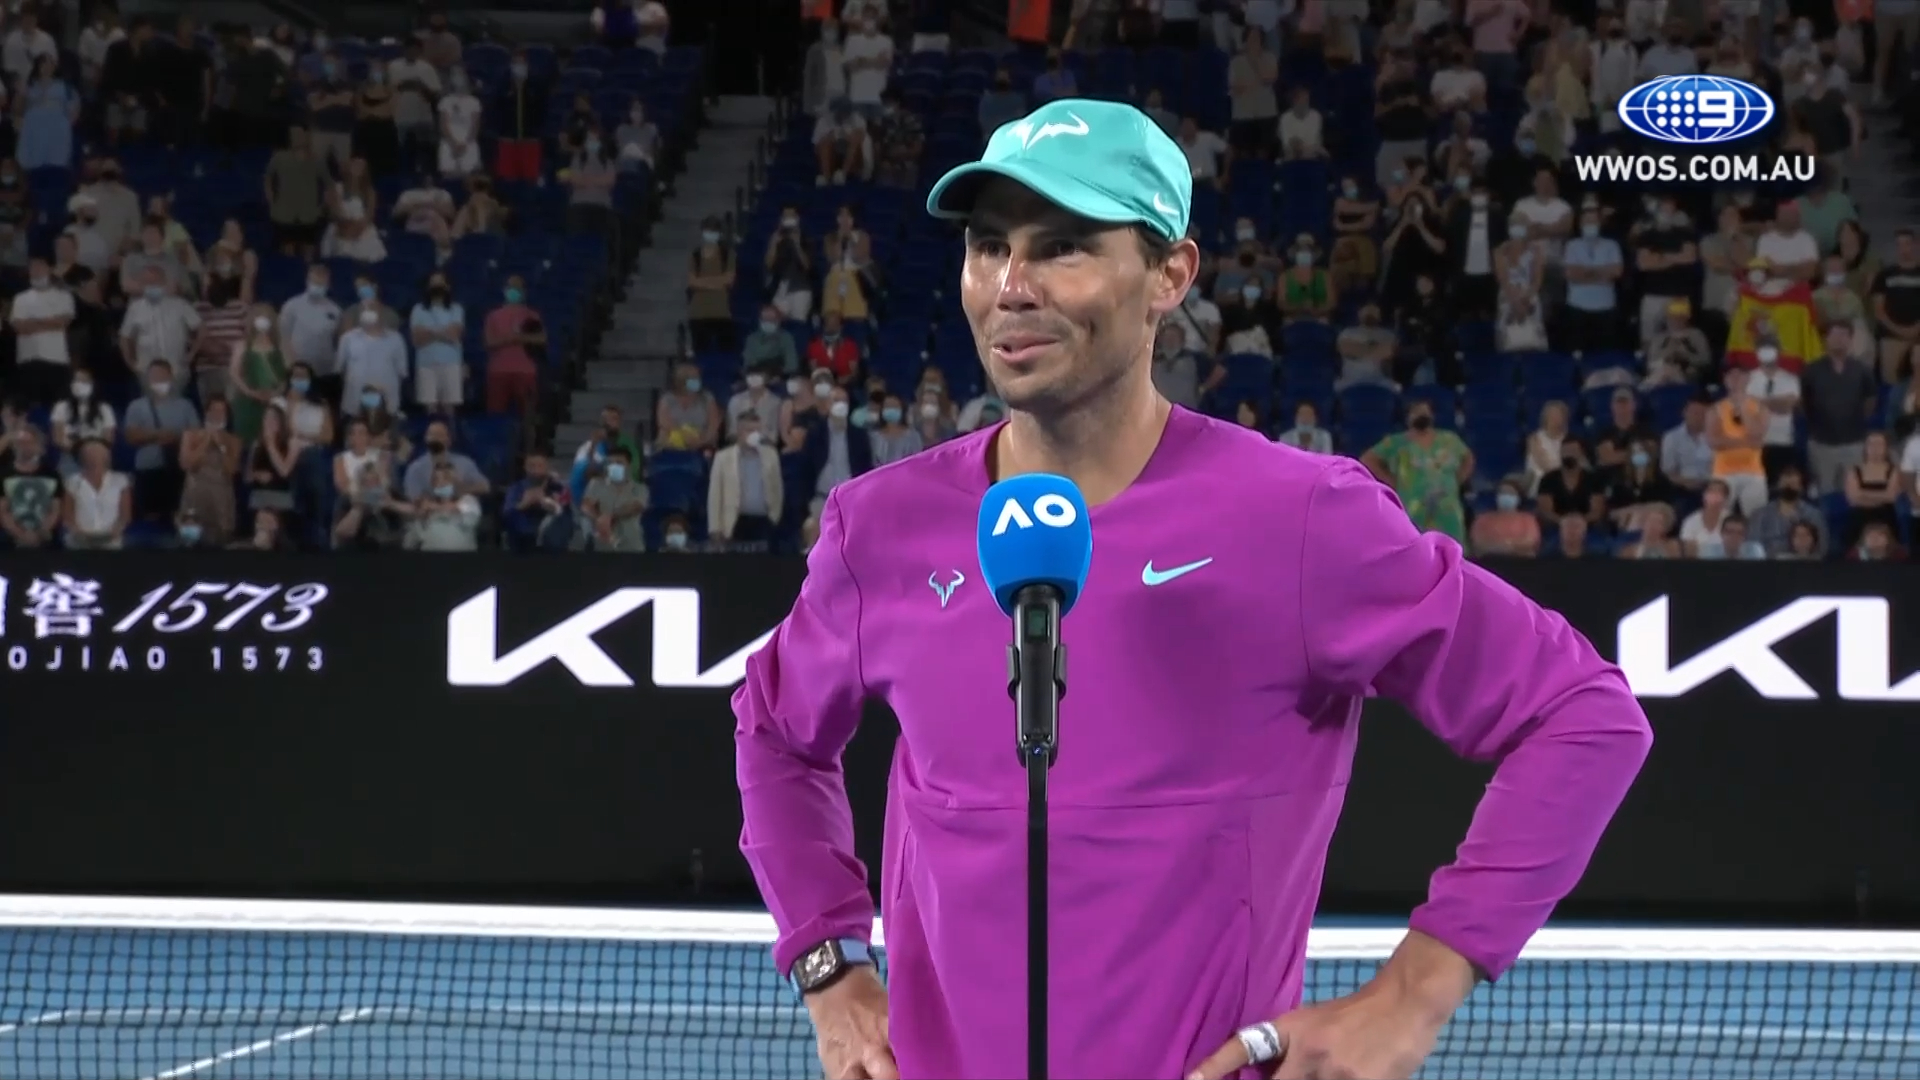 Rafael Nadal thankful for every match he can play after "tough year"